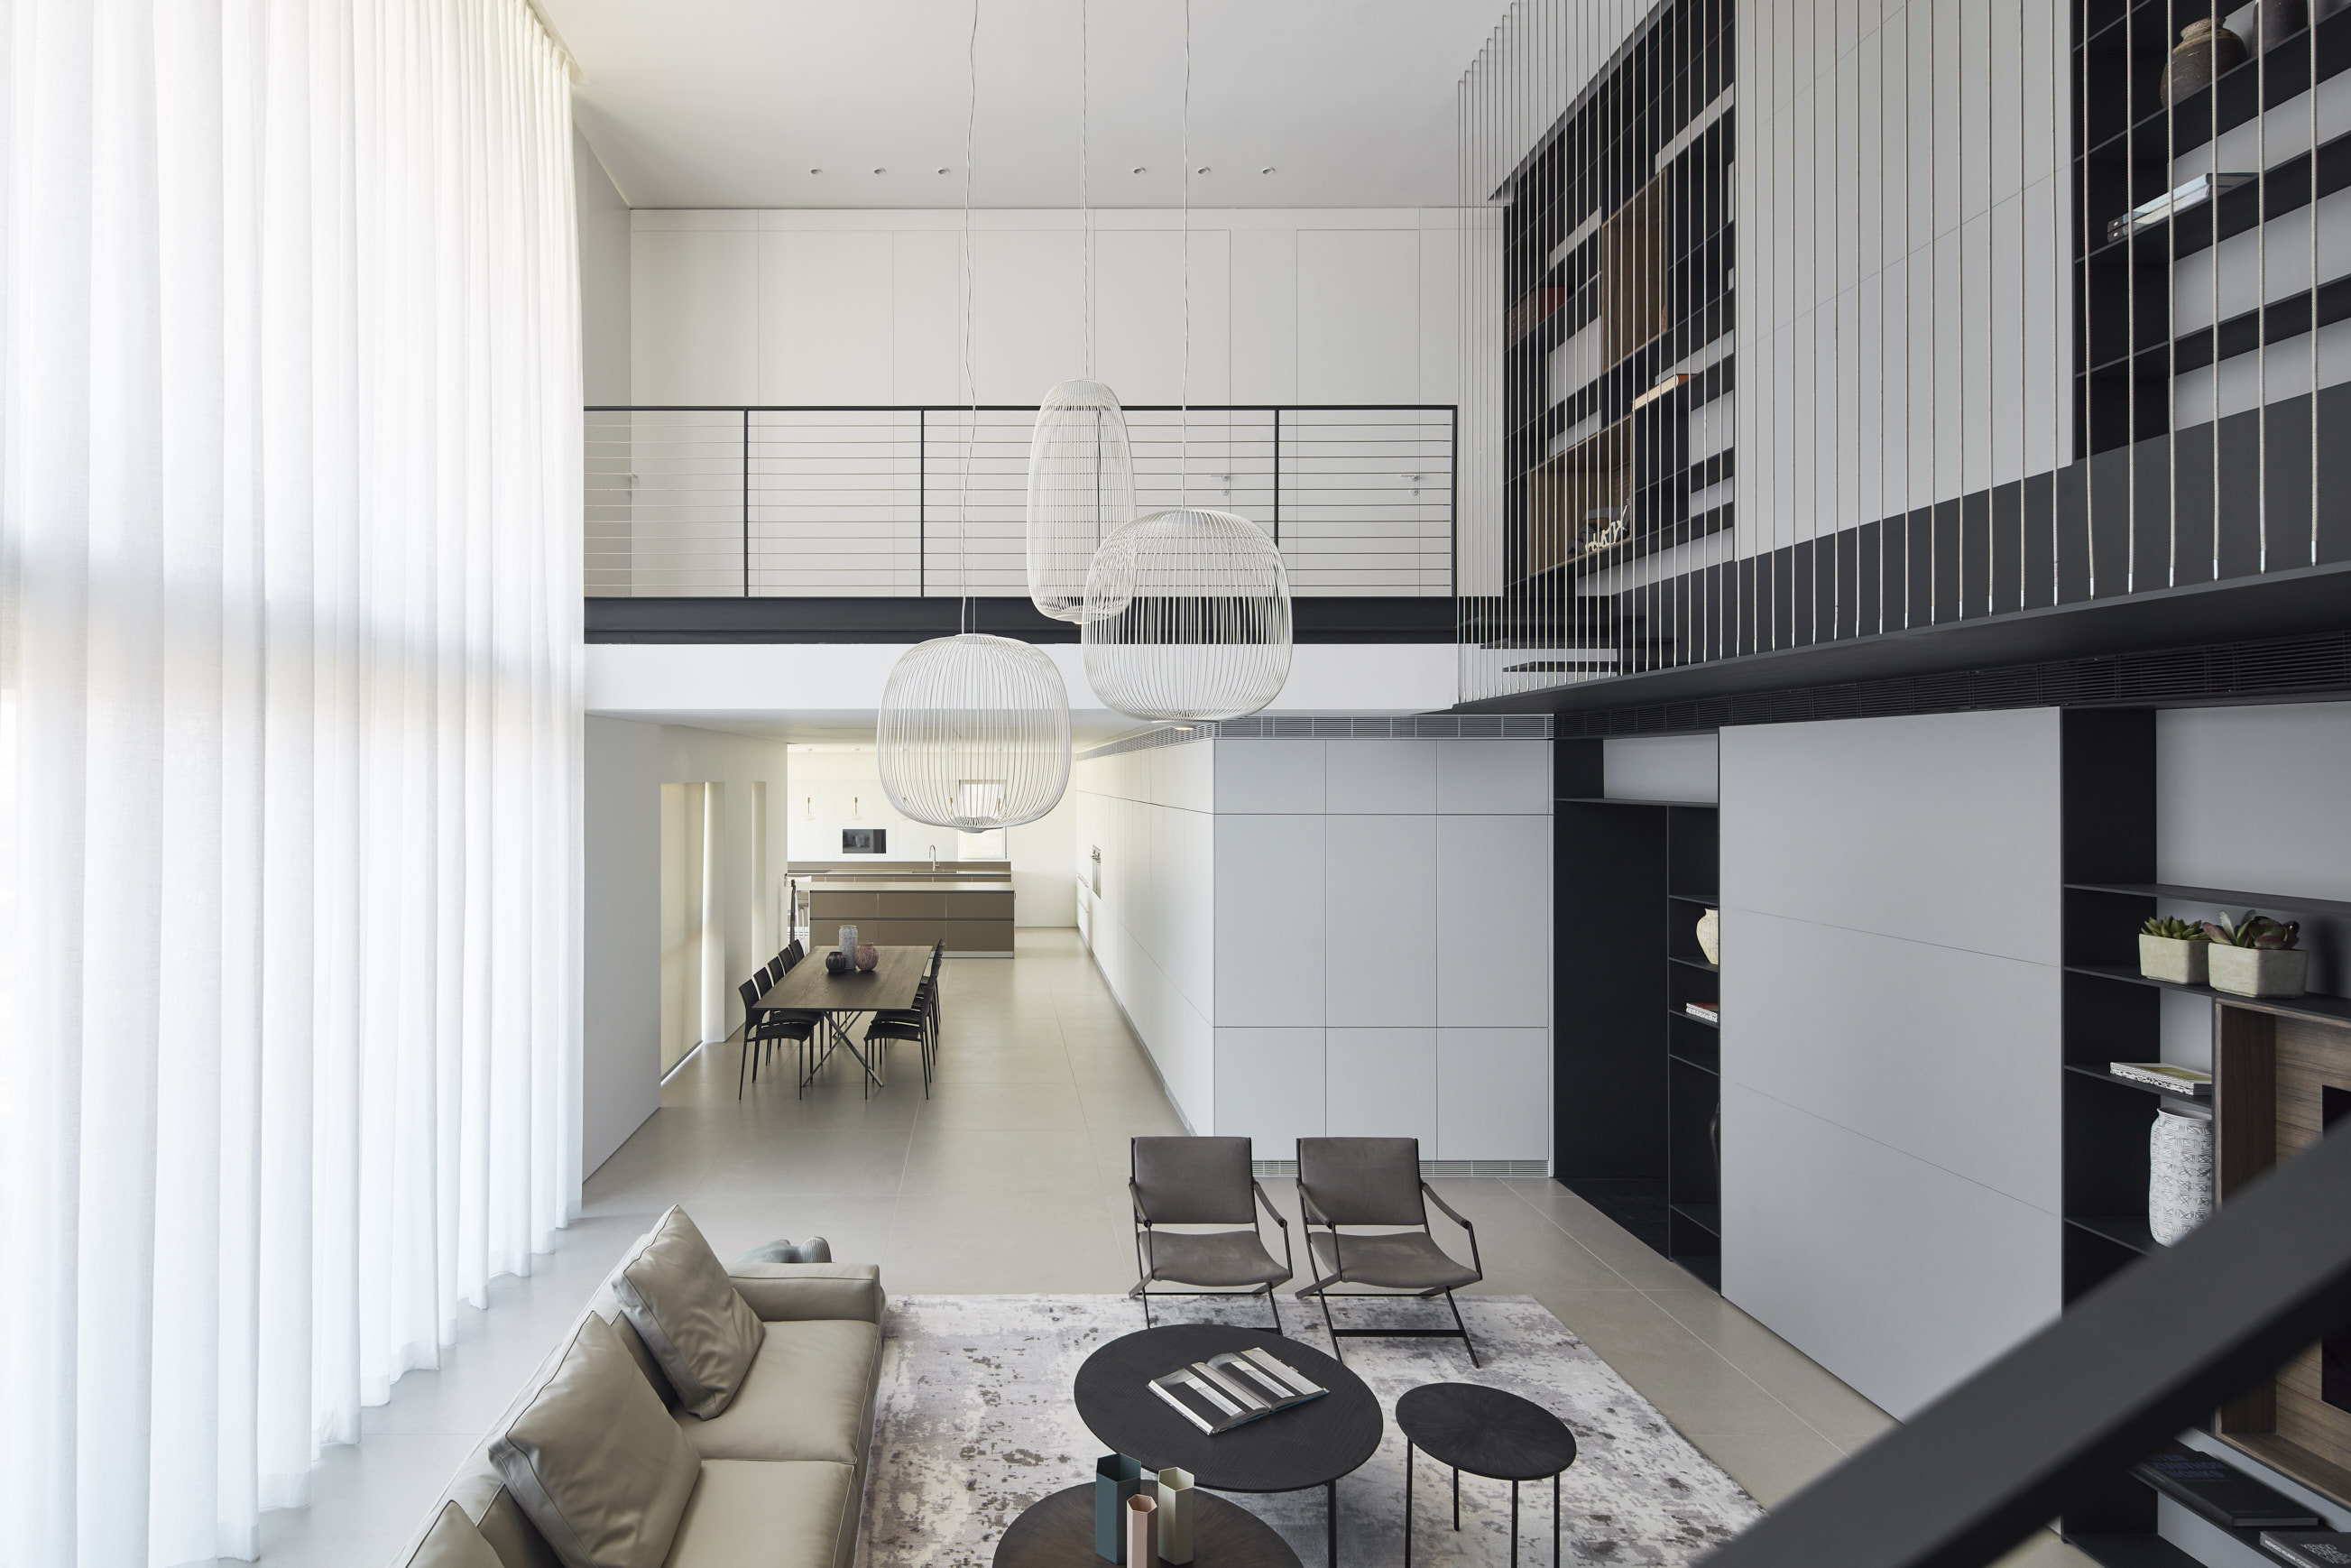 A Duplex Apartment in Ramat HaSharon, Israel by Pitsou Kedem Architects